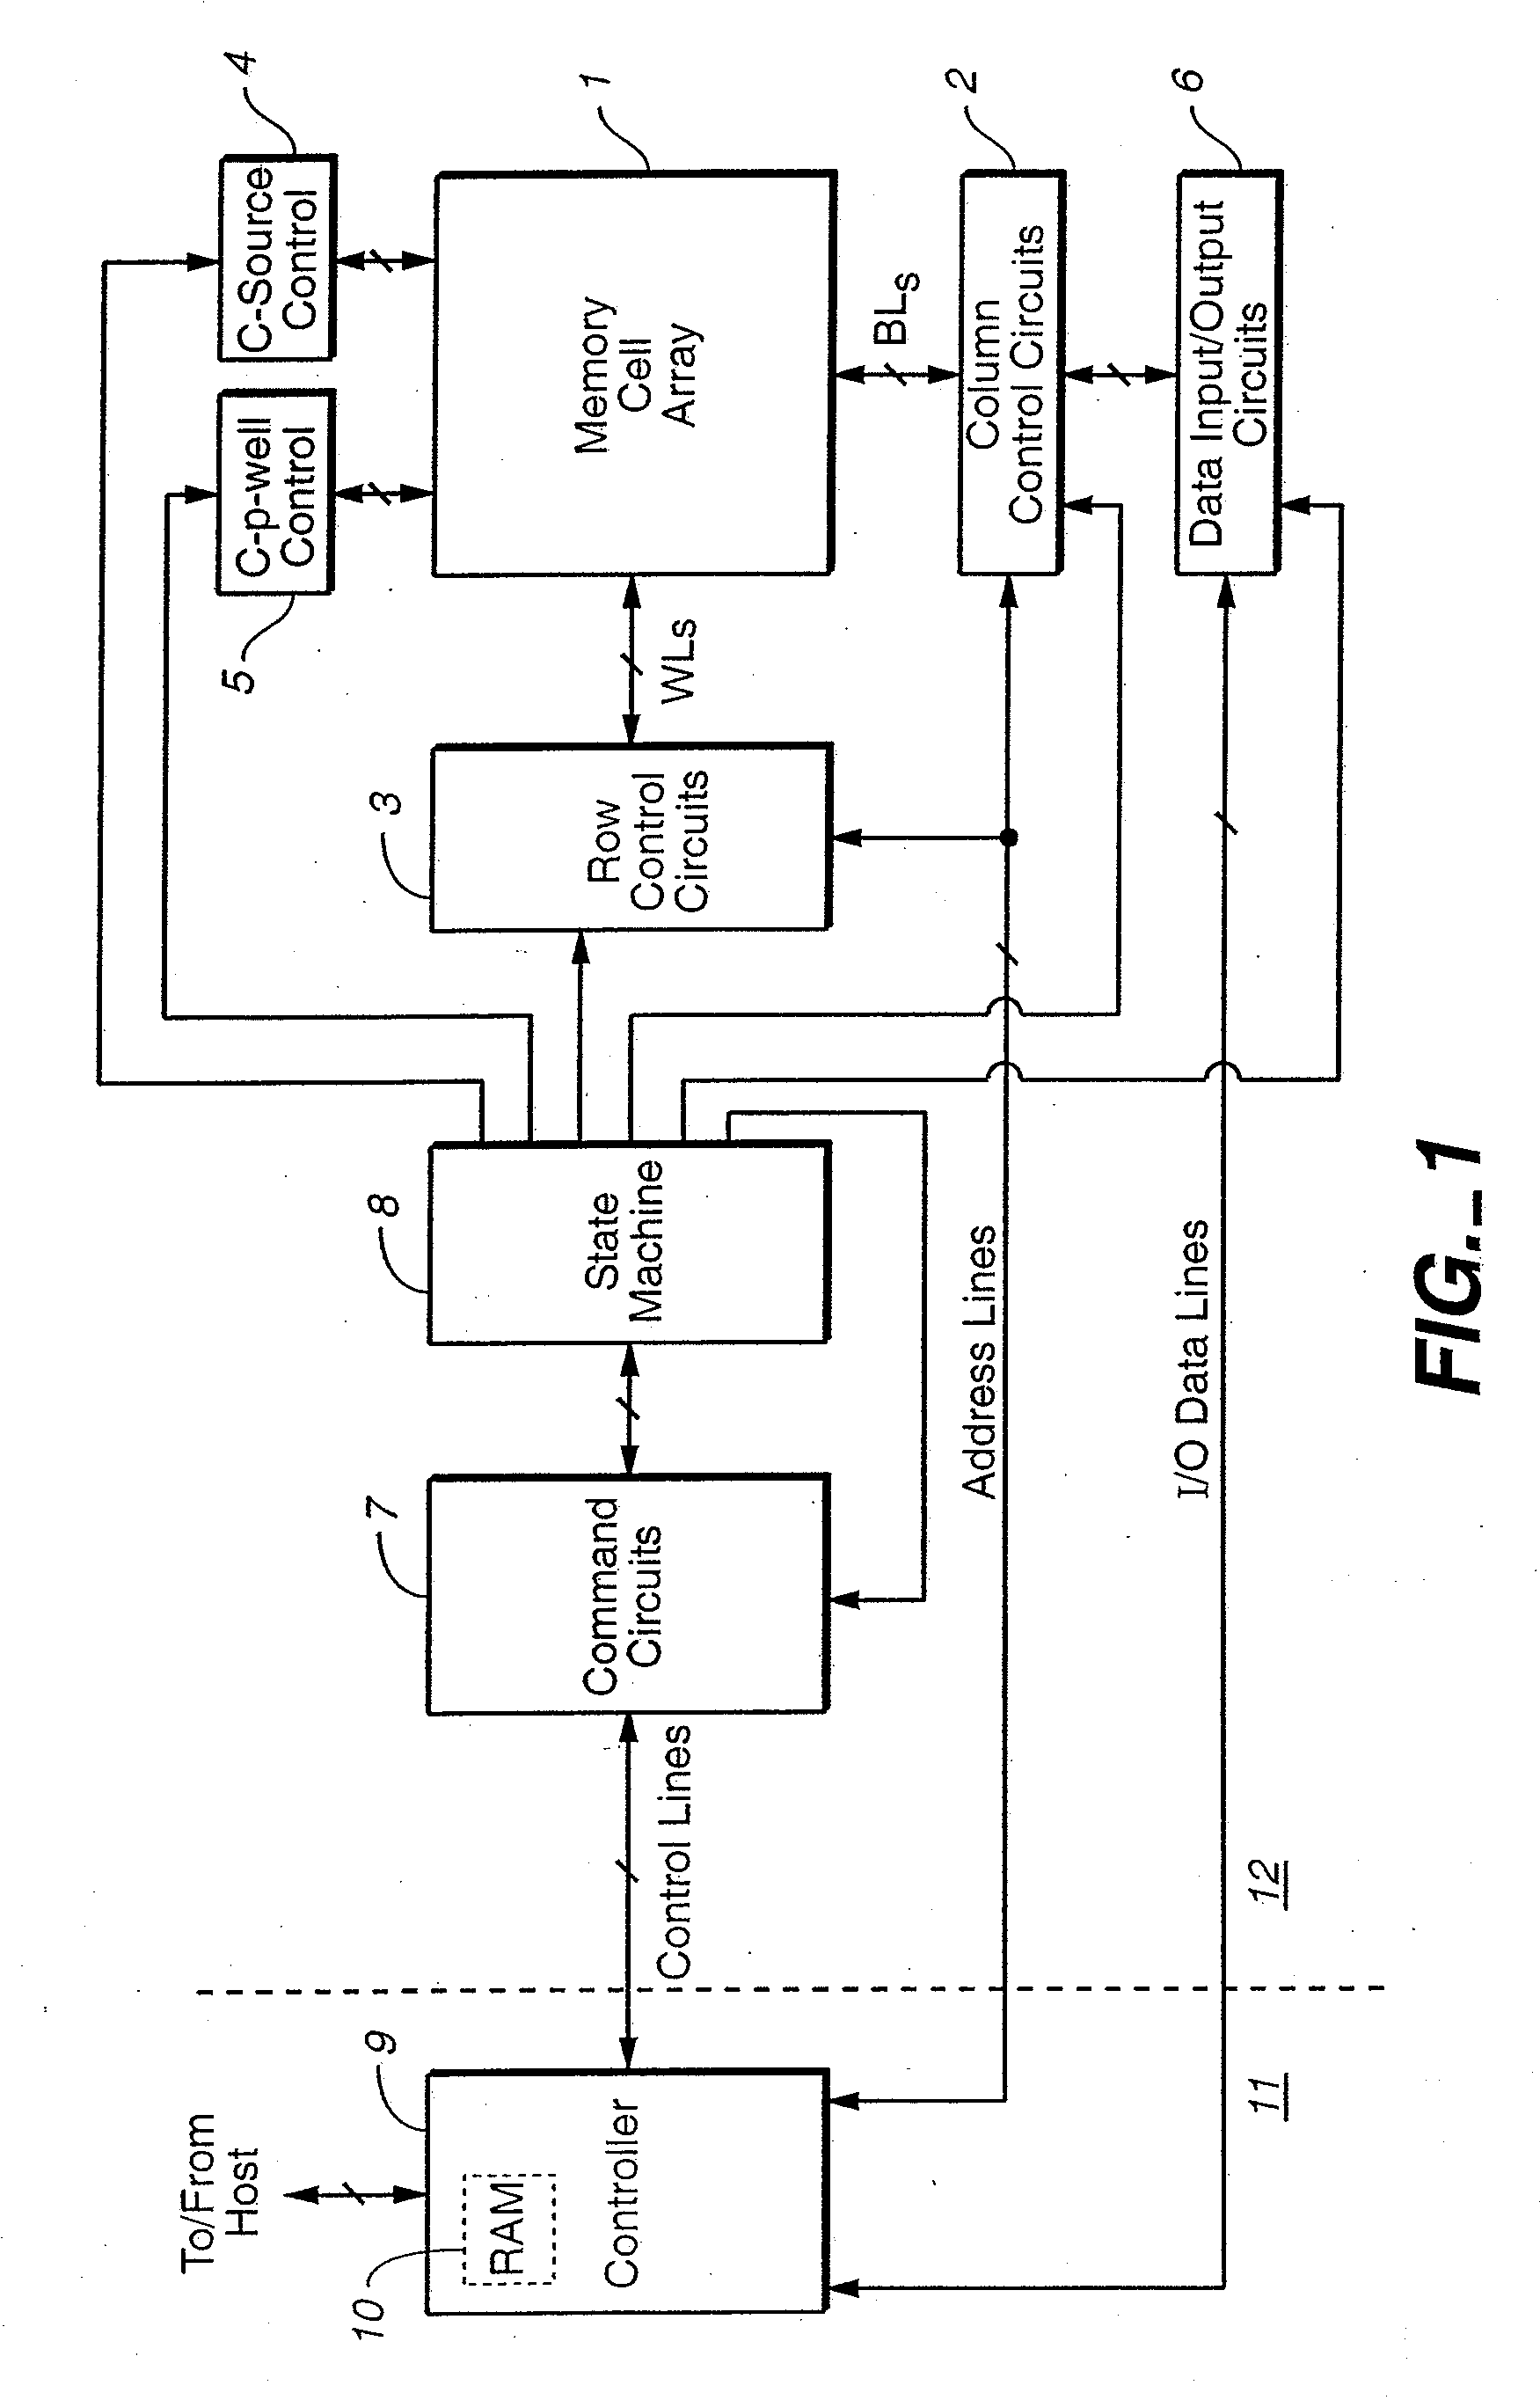 Flash Memory Cell Arrays Having Dual Control Gates Per Memory Cell Charge Storage Element